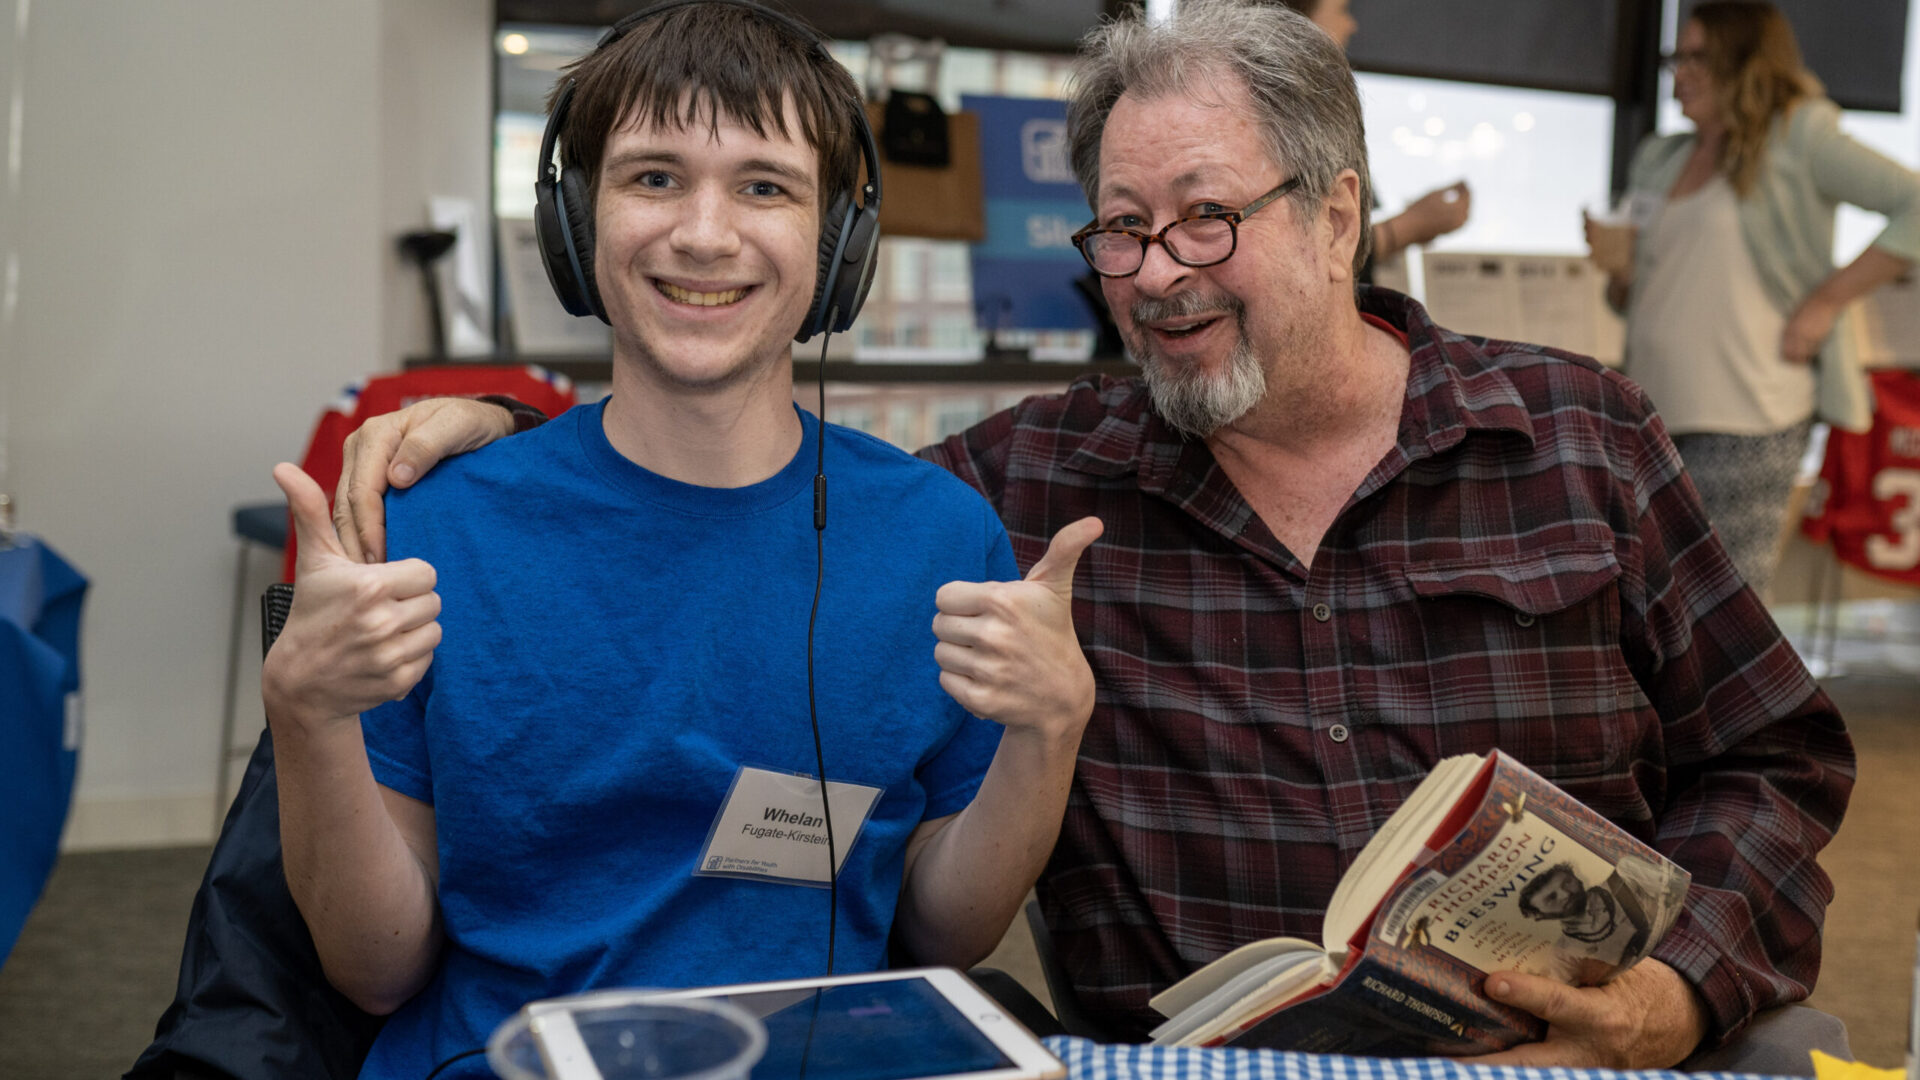 One man smiling and giving thumbs up and another man holding a book and smiling